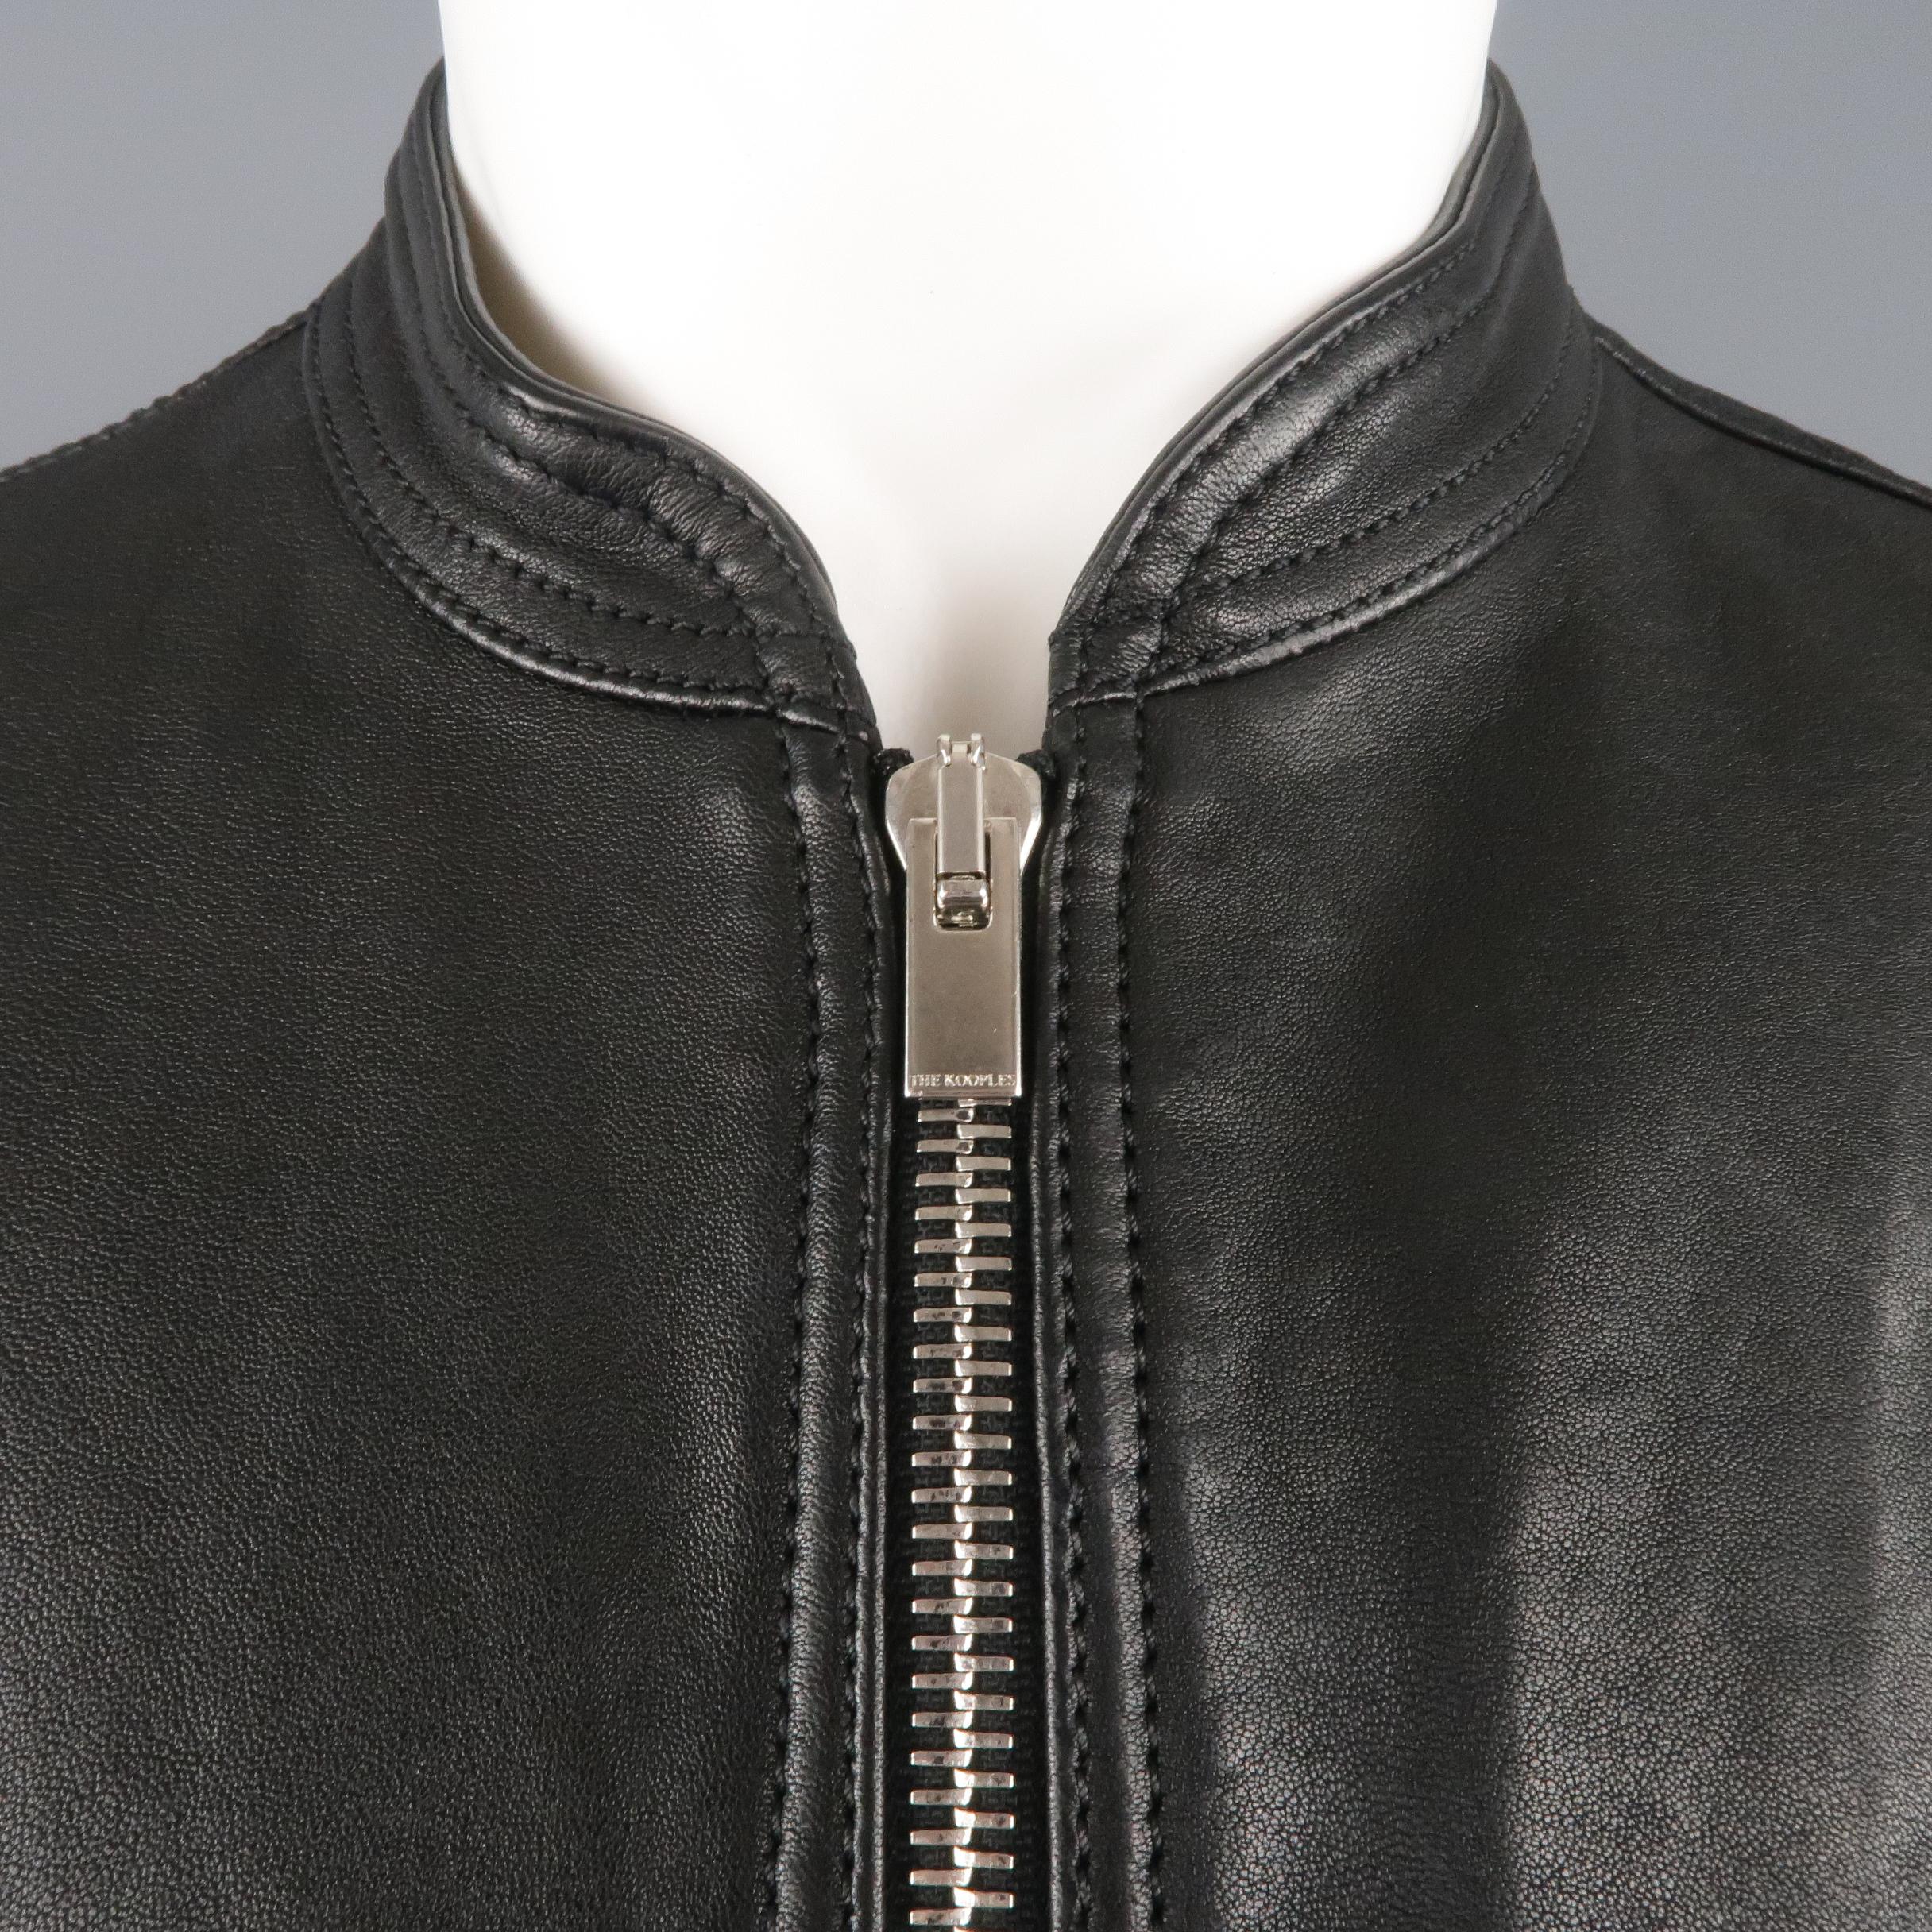 THE KOOPLES biker style jacket comes in black leather with a baseball collar, zip front, dual patch flap pockets, snap cuffs, and ribbed waistband.
 
Excellent Pre-Owned Condition.
Marked: M
 
Measurements:
 
Shoulder: 16.5 in.
Chest: 40 in.
Sleeve: